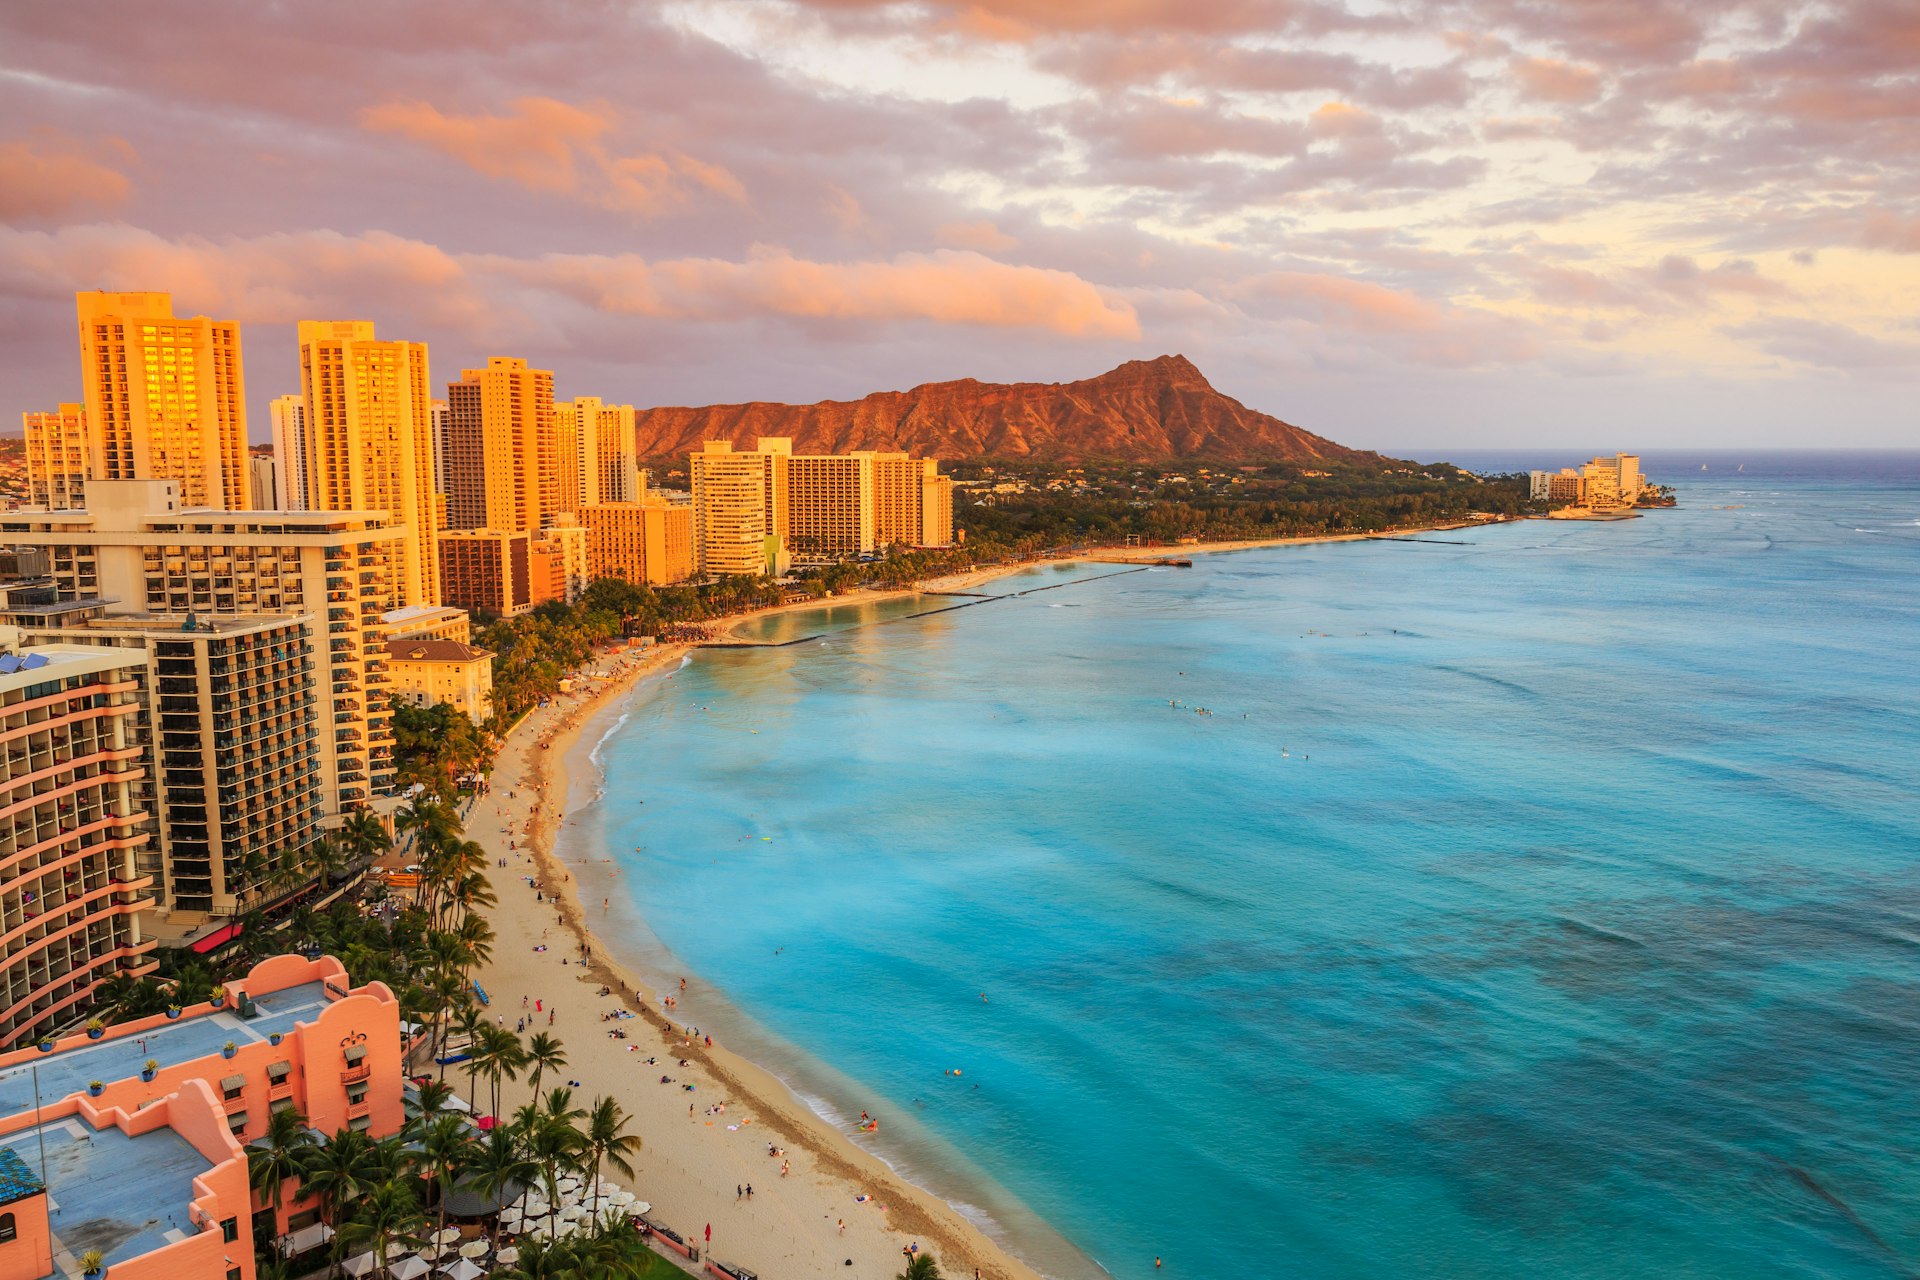 Rows of high-rise buildings back a curve of golden sand; Diamond Head volcano including the hotels and buildings on Waikiki Beach